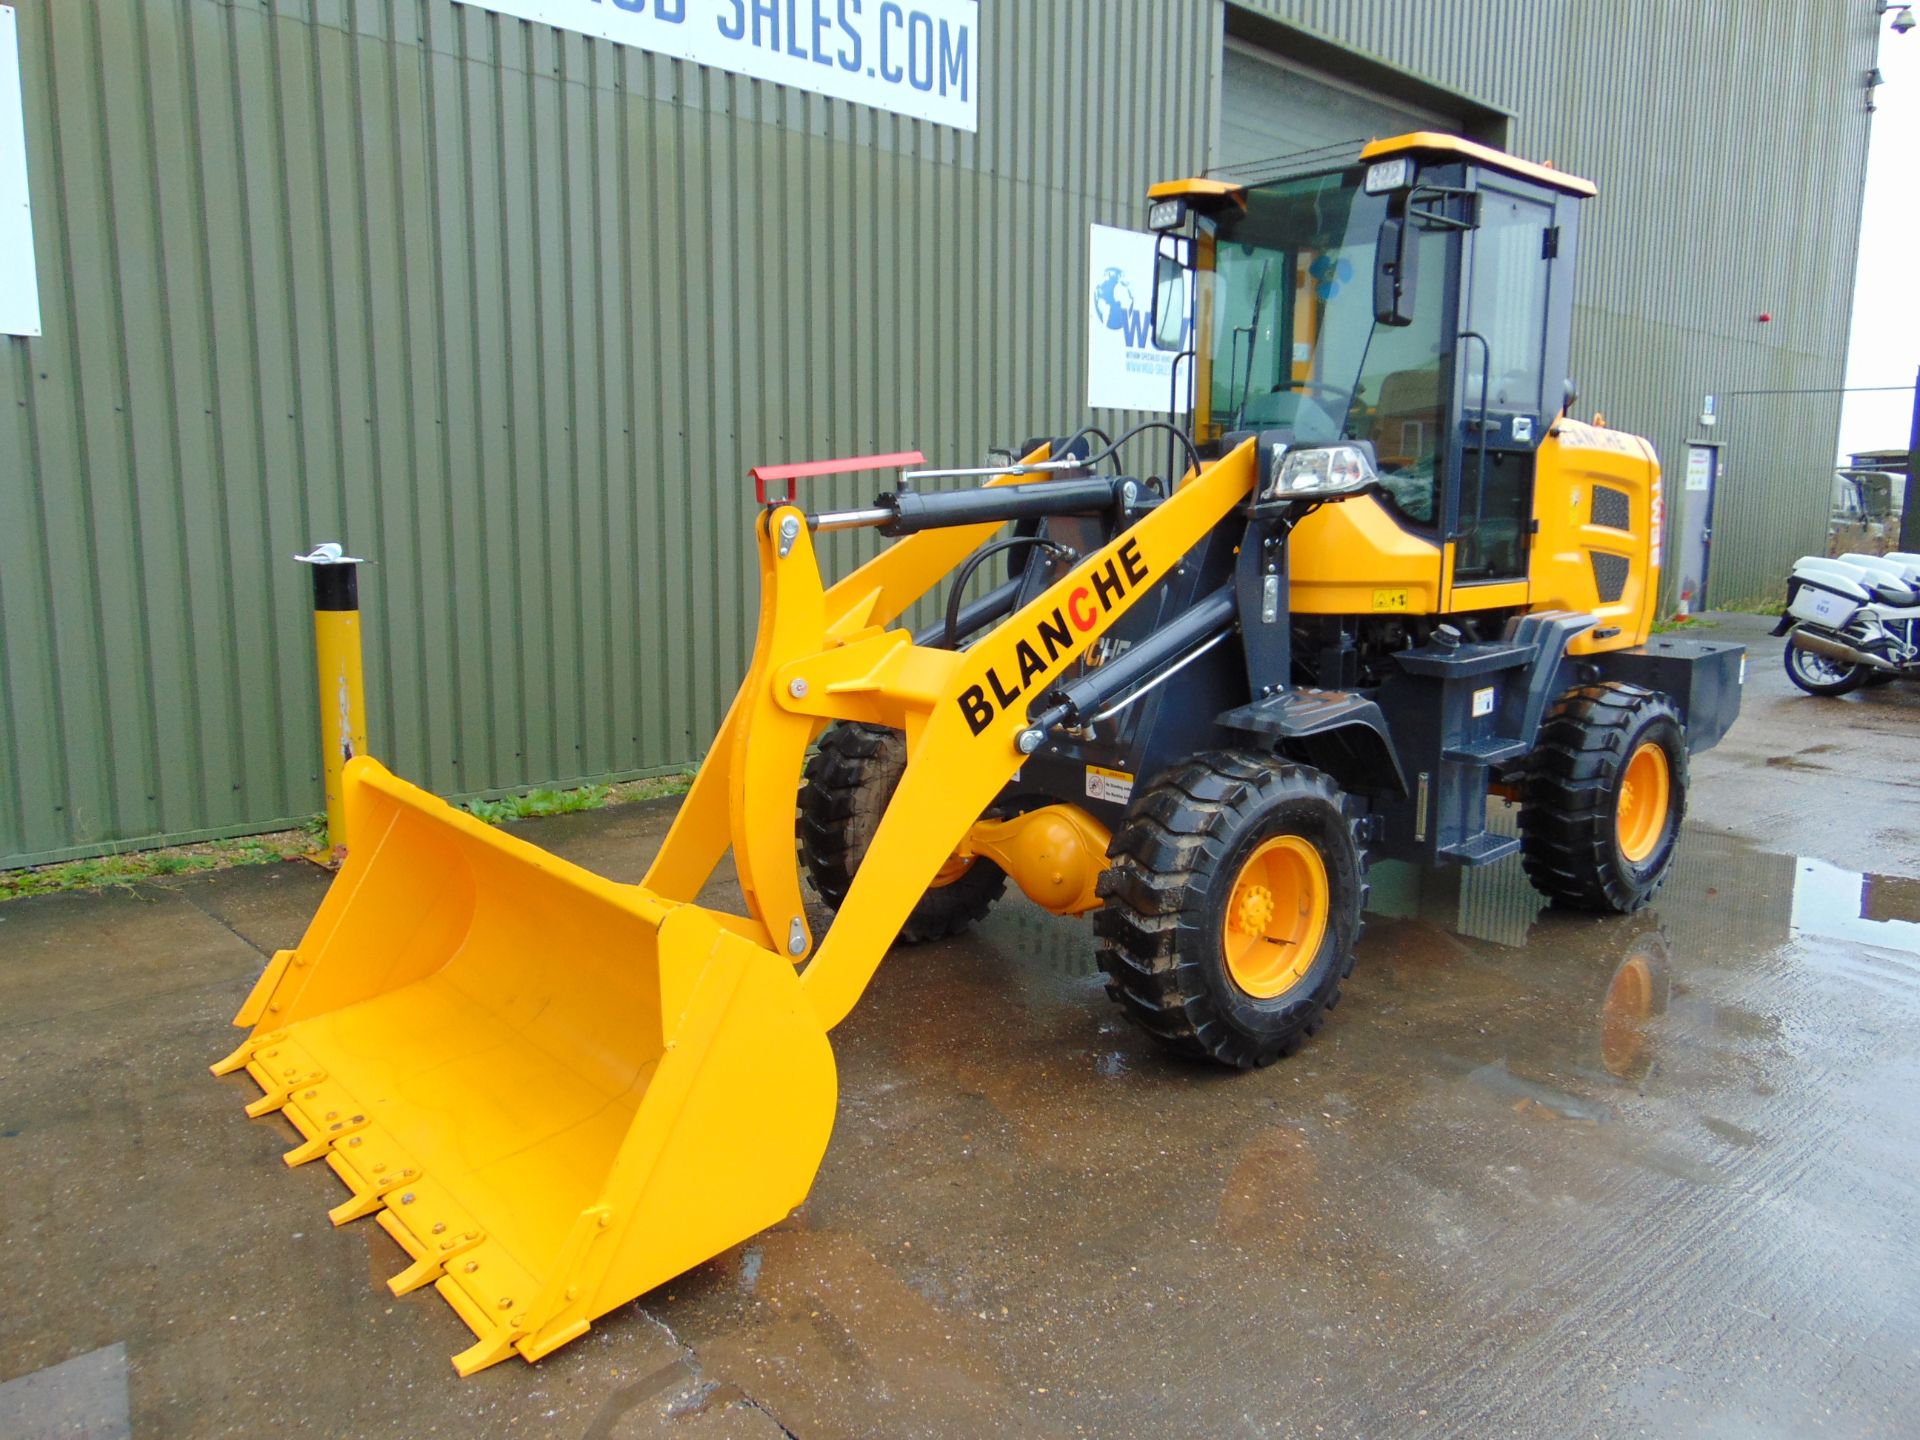 2023 Blanche TW36 Articulated Pivot Steer Wheeled Loading Shovel New and Unused - Image 5 of 33